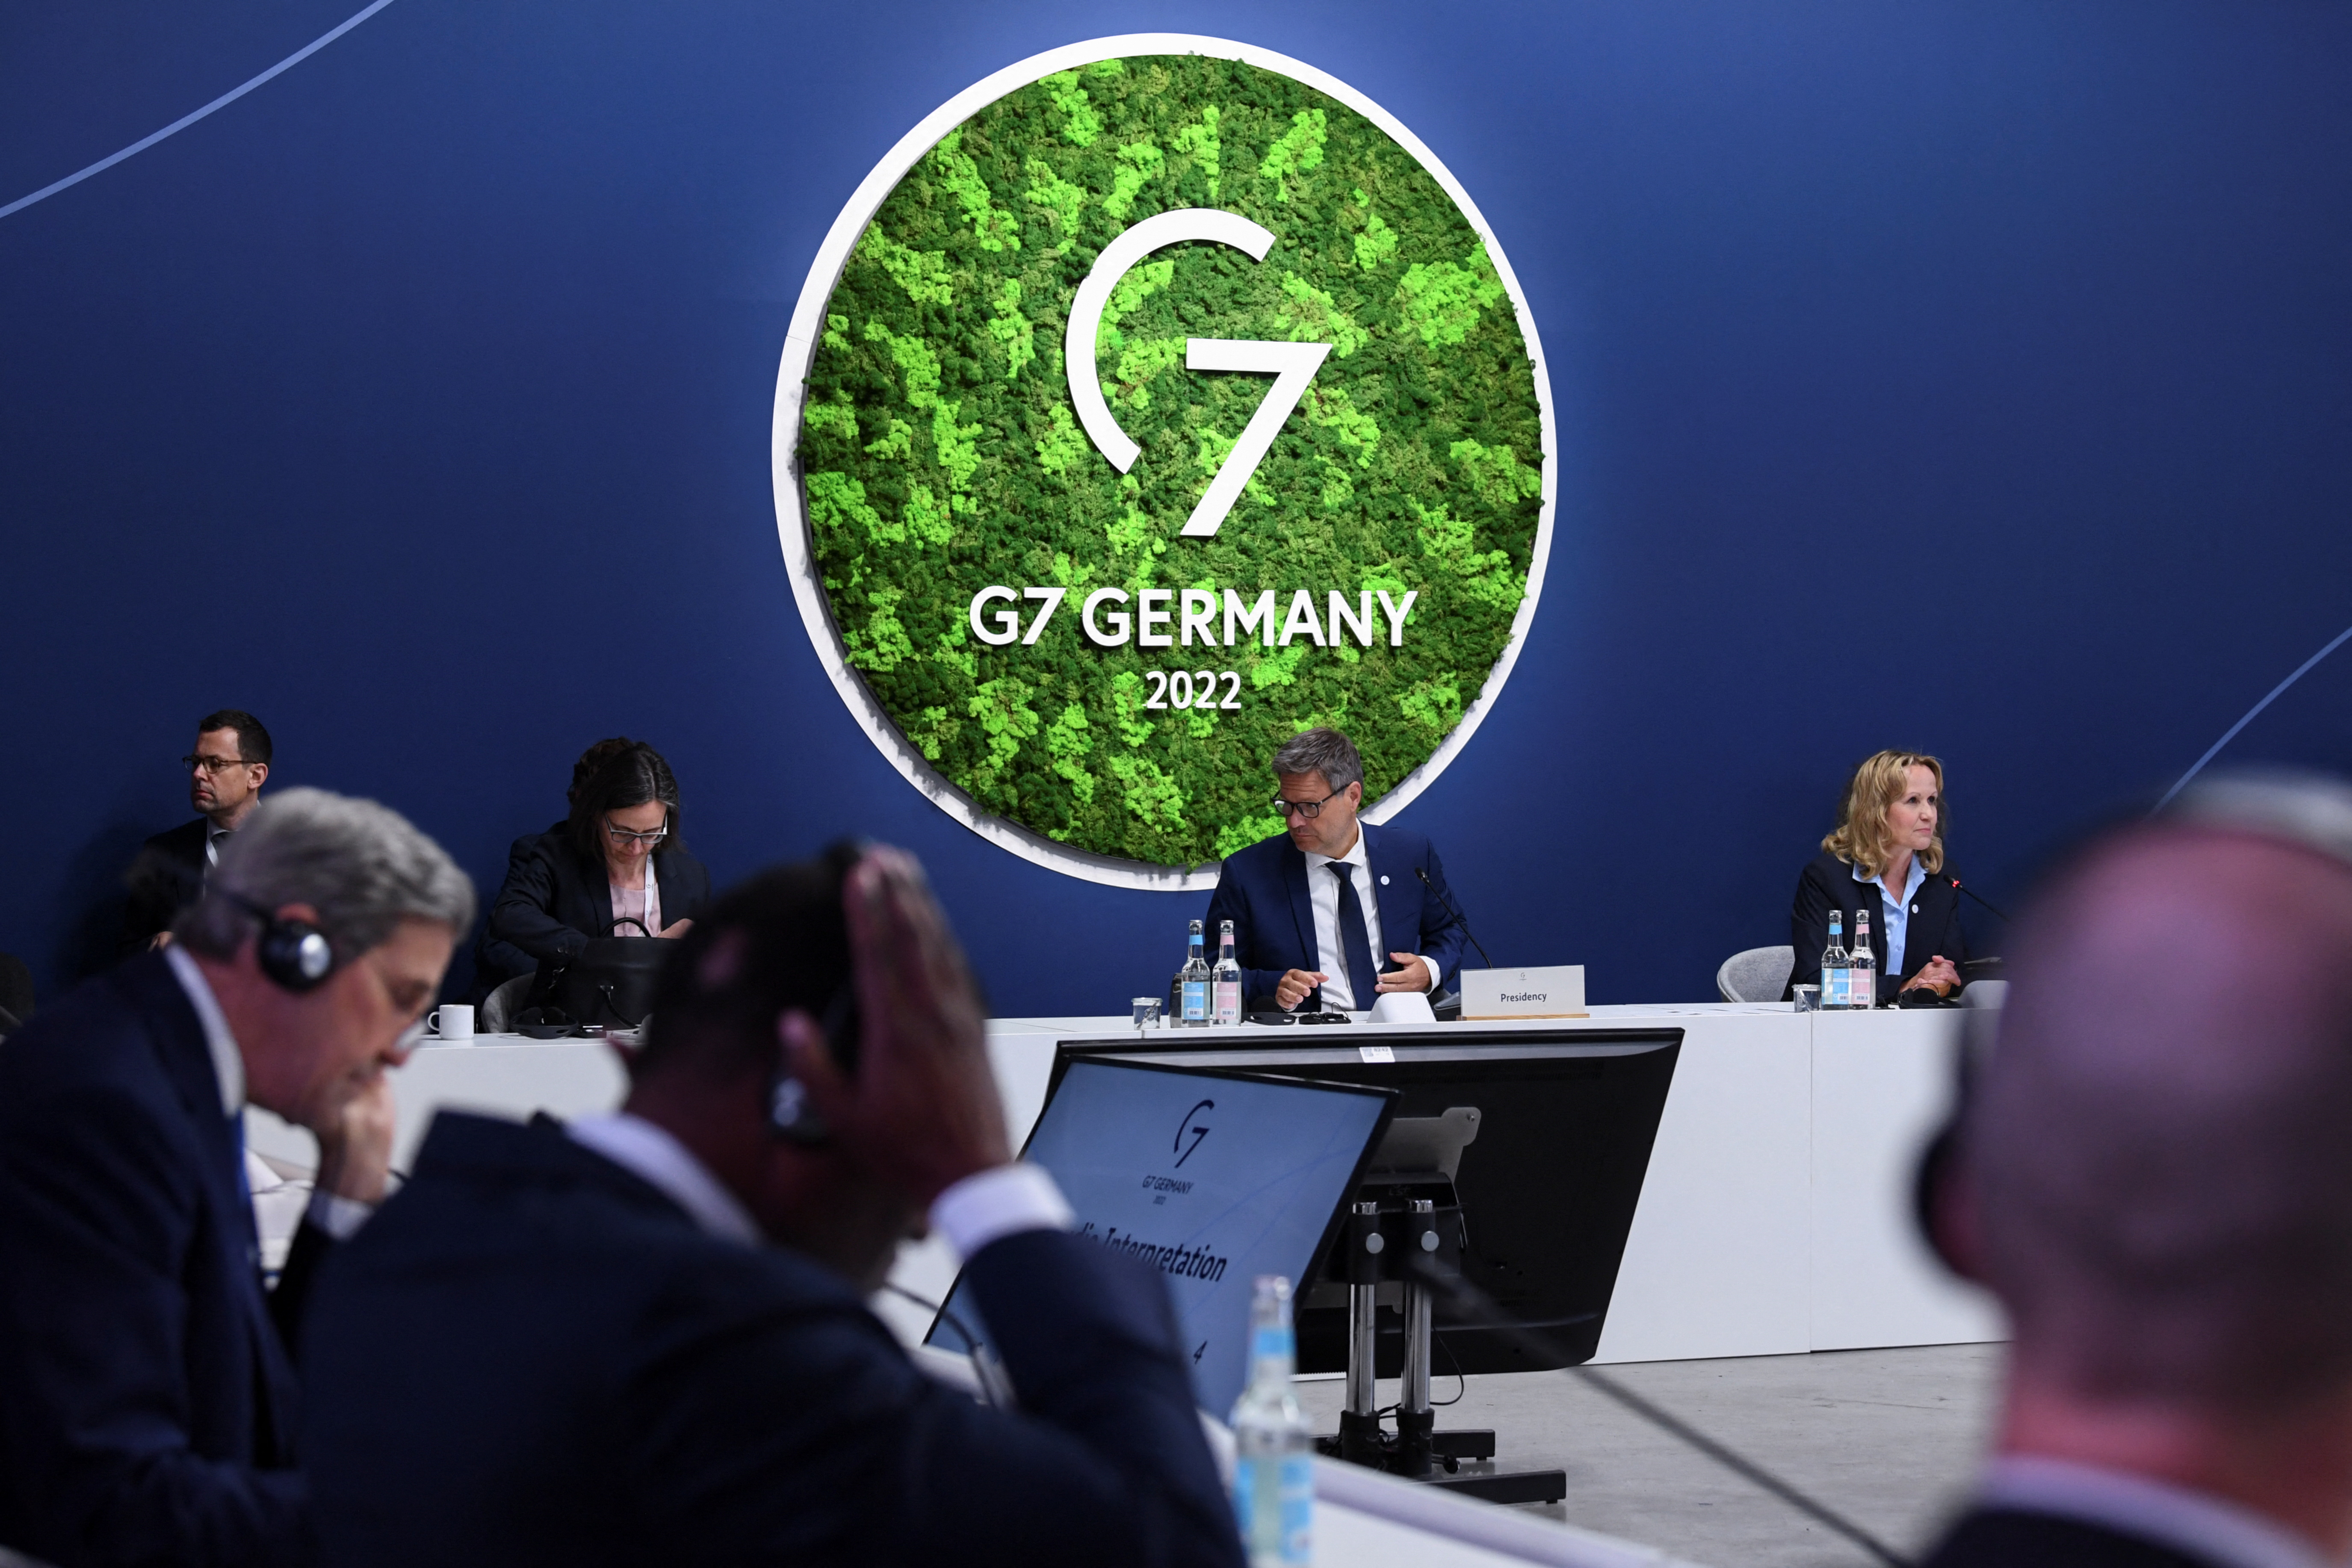 G7 climate, energy and environment ministers meet in Berlin